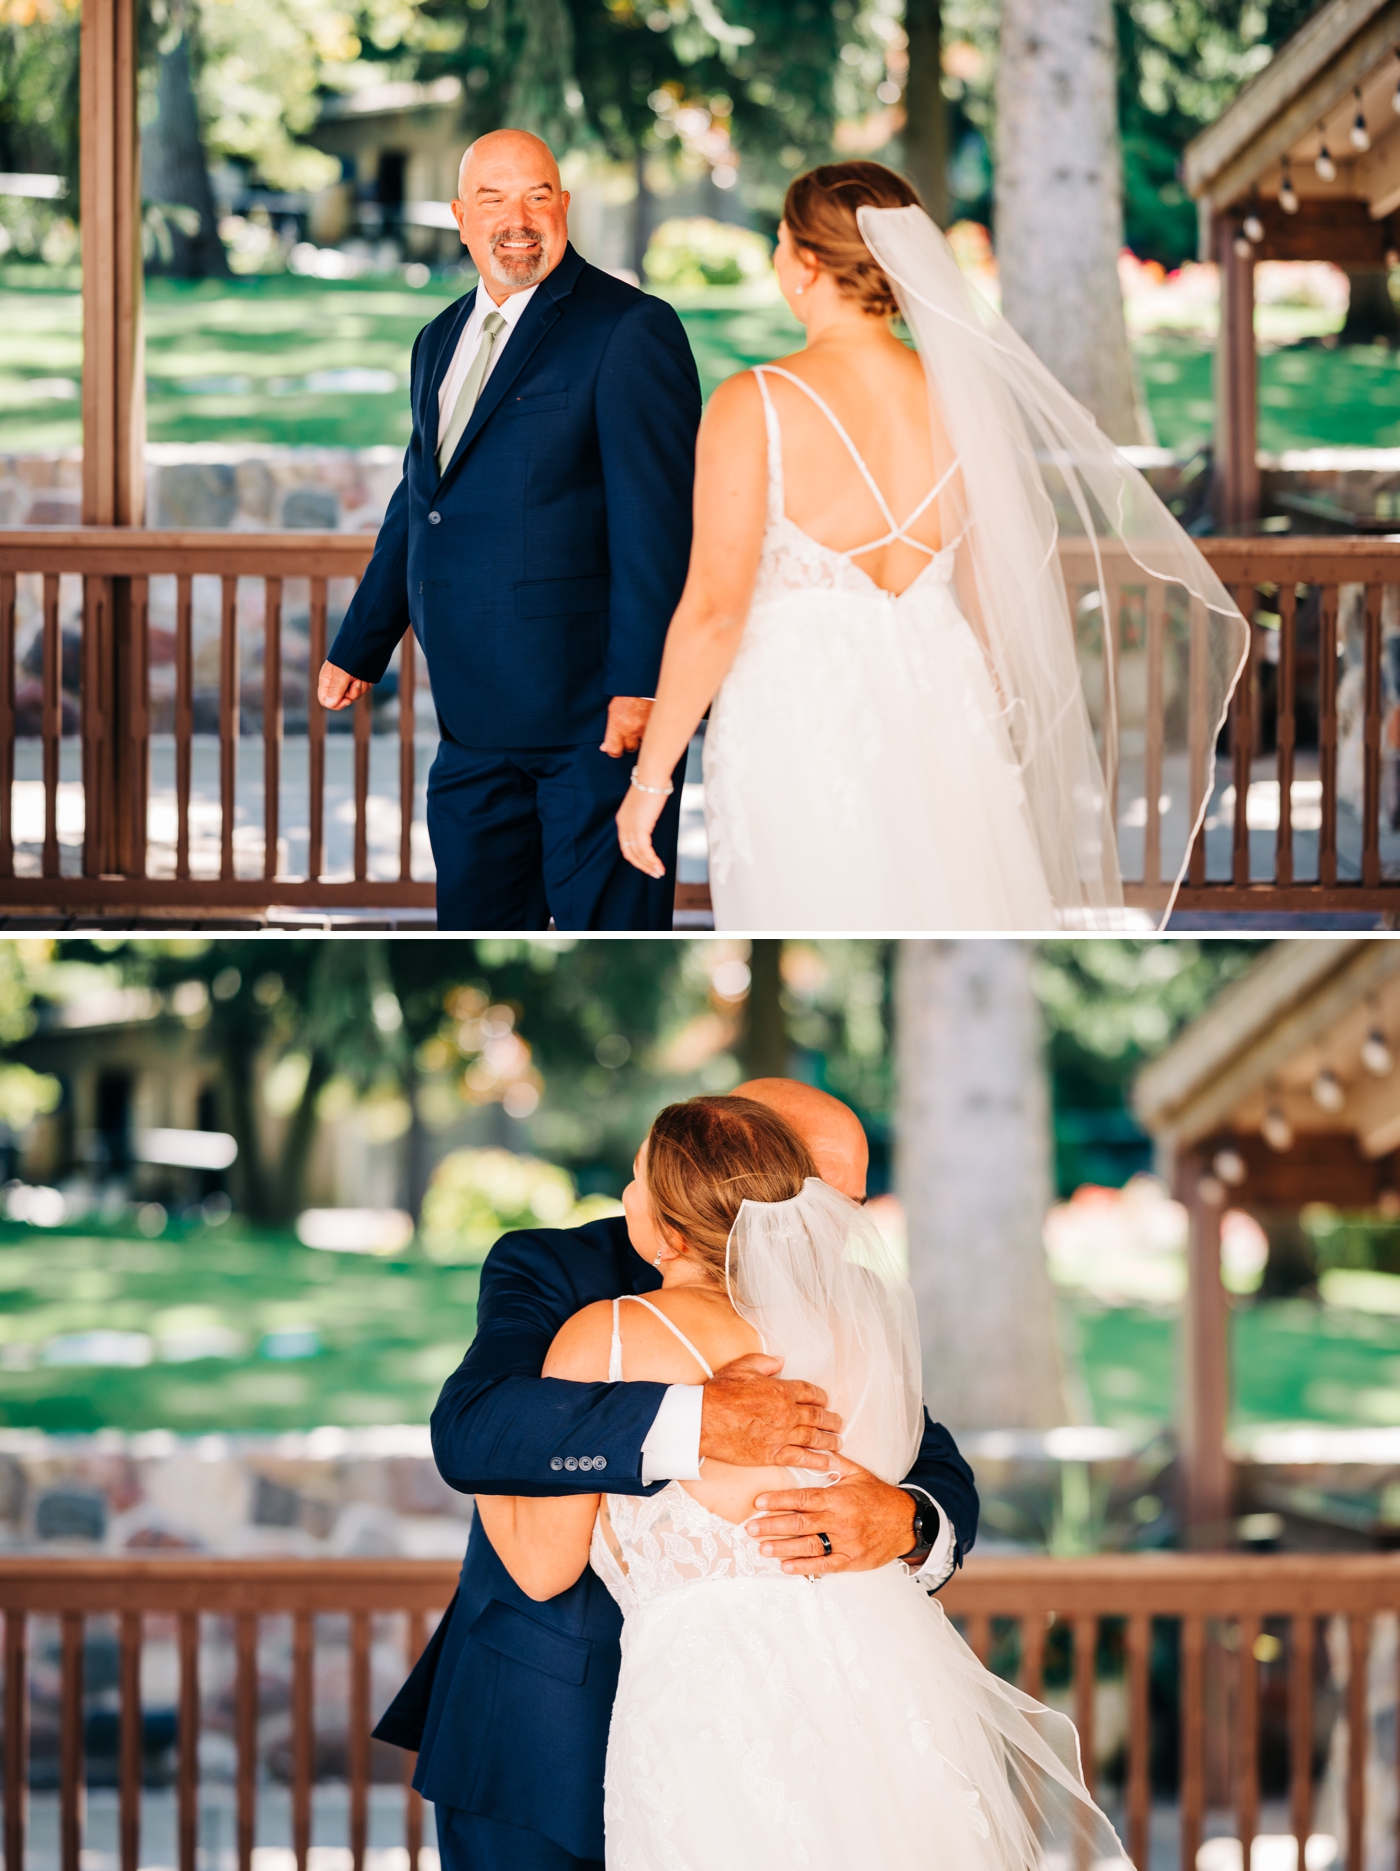 Bride and father of the bride first look photos at Pine Knob Carriage House